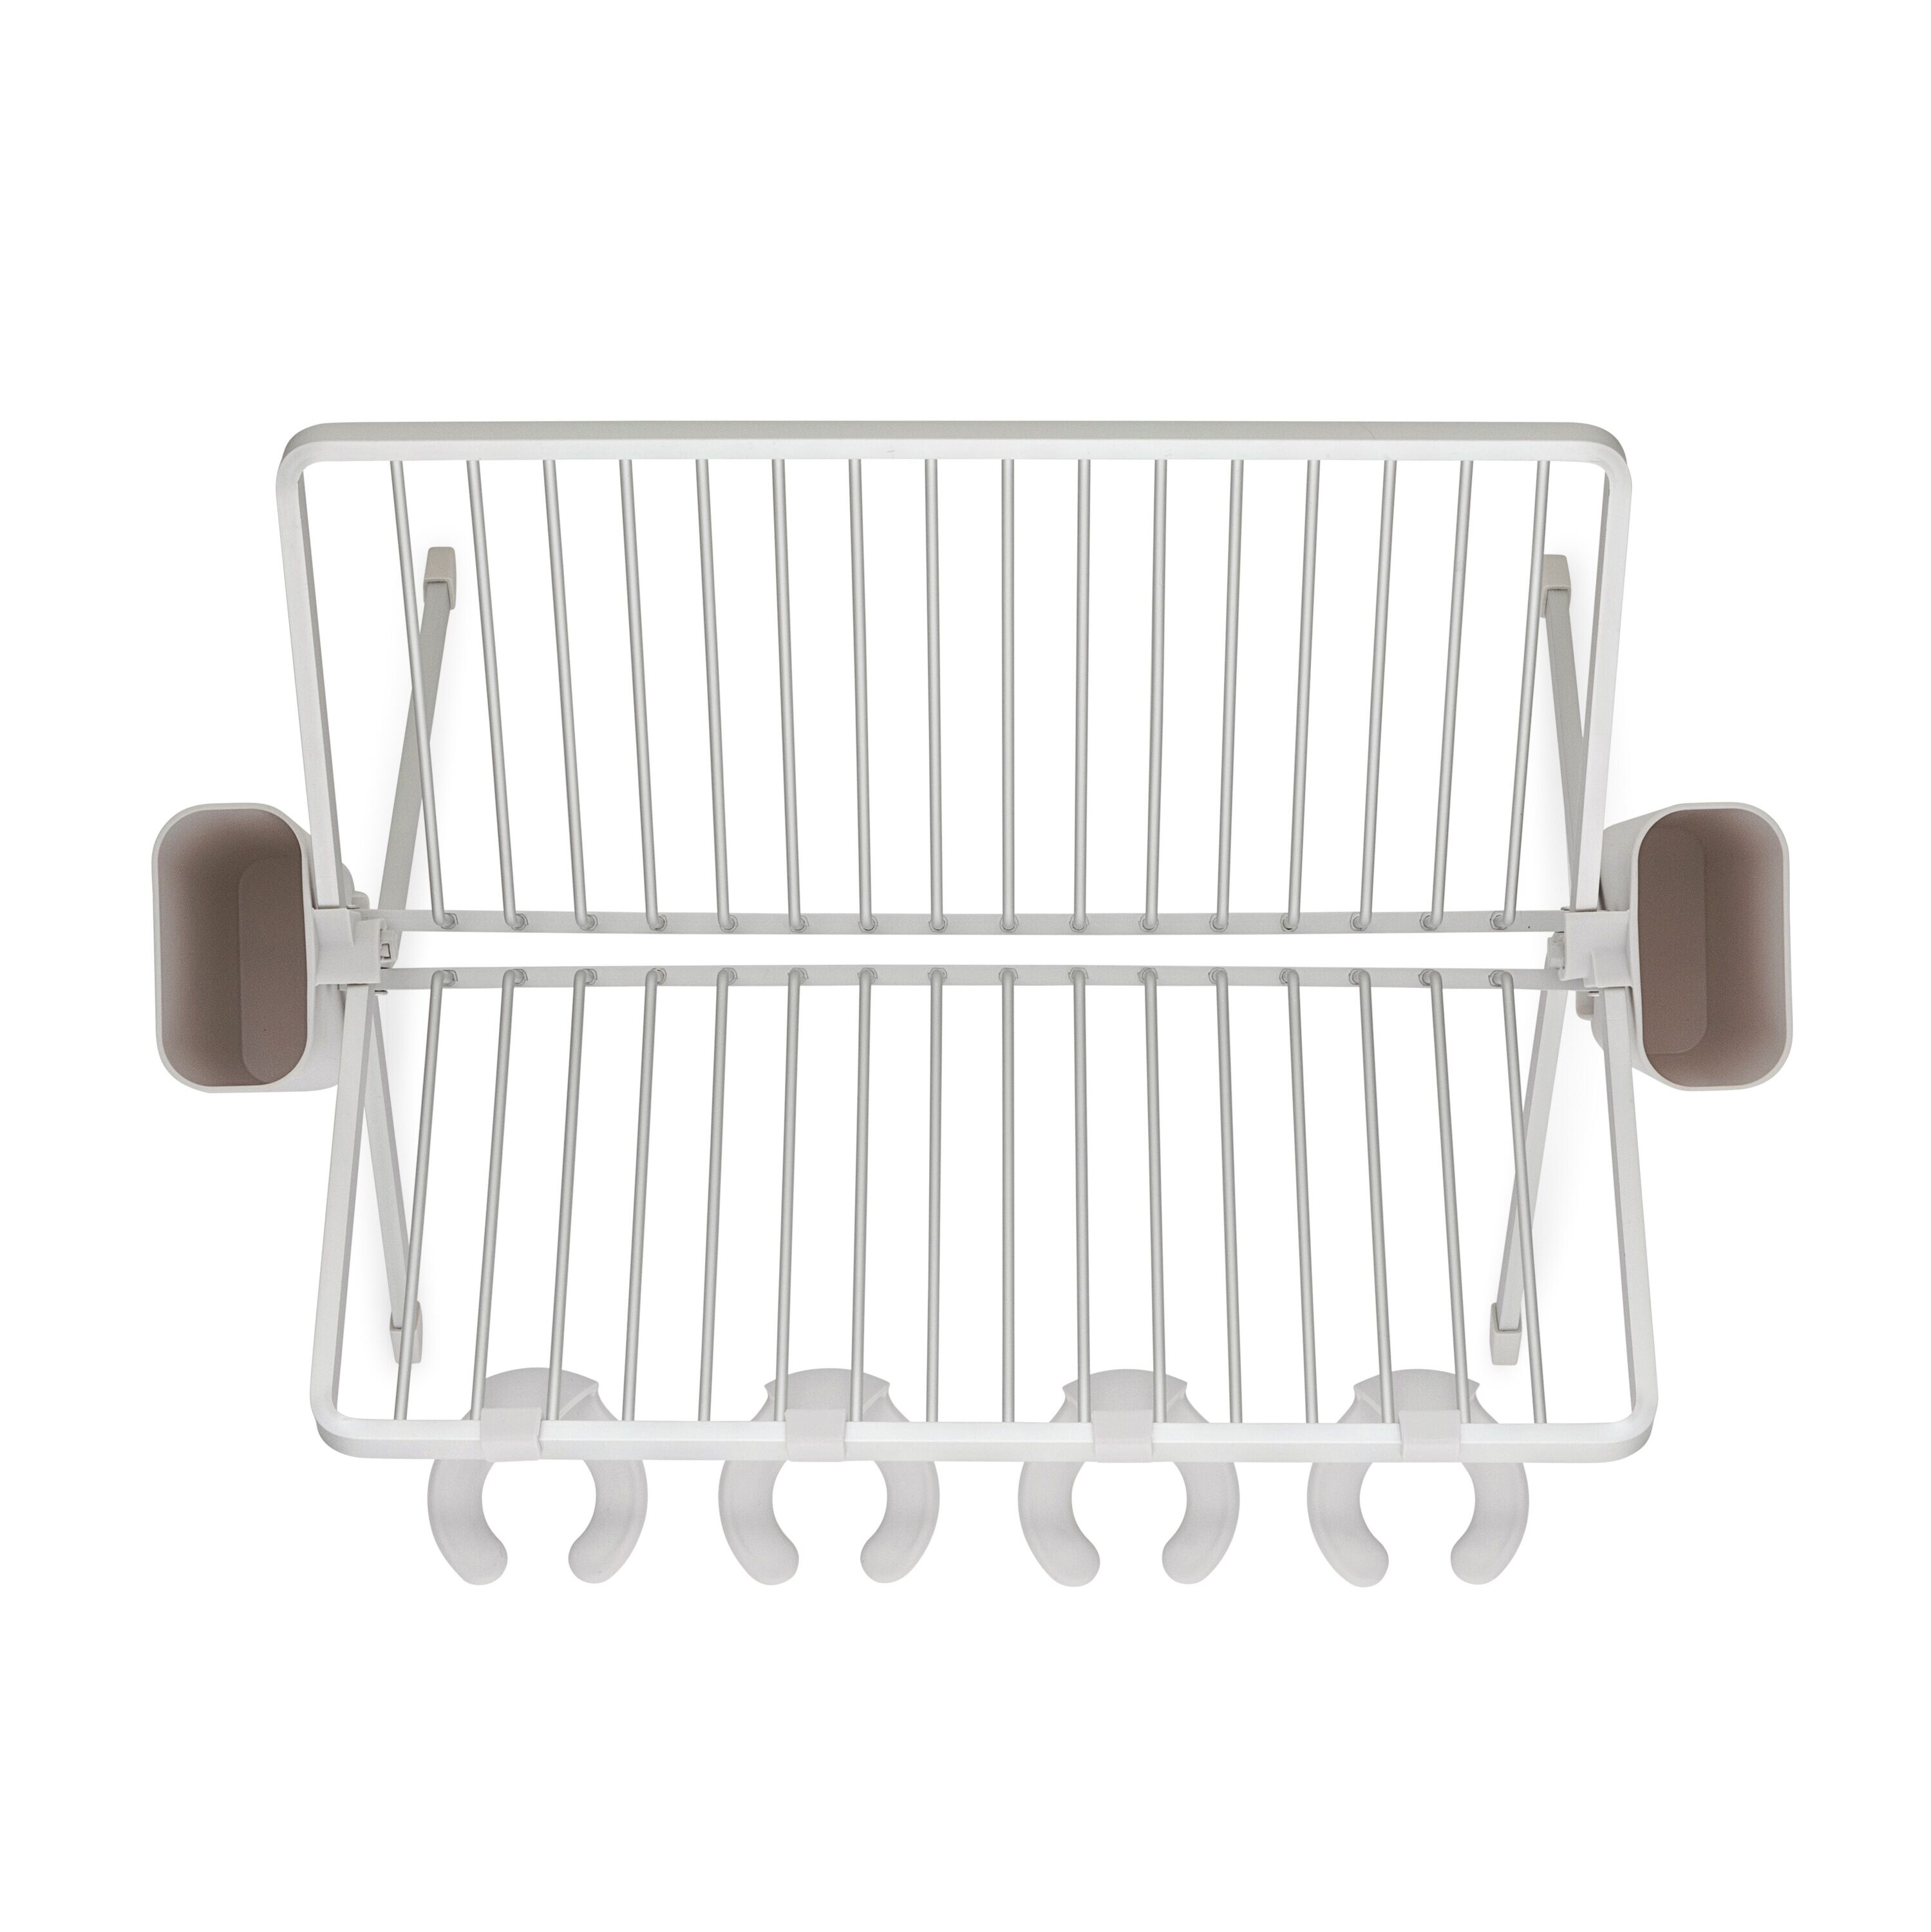 Hastings Home 12.5-in W x 16.5-in L x 13-in H Wood Dish Rack at